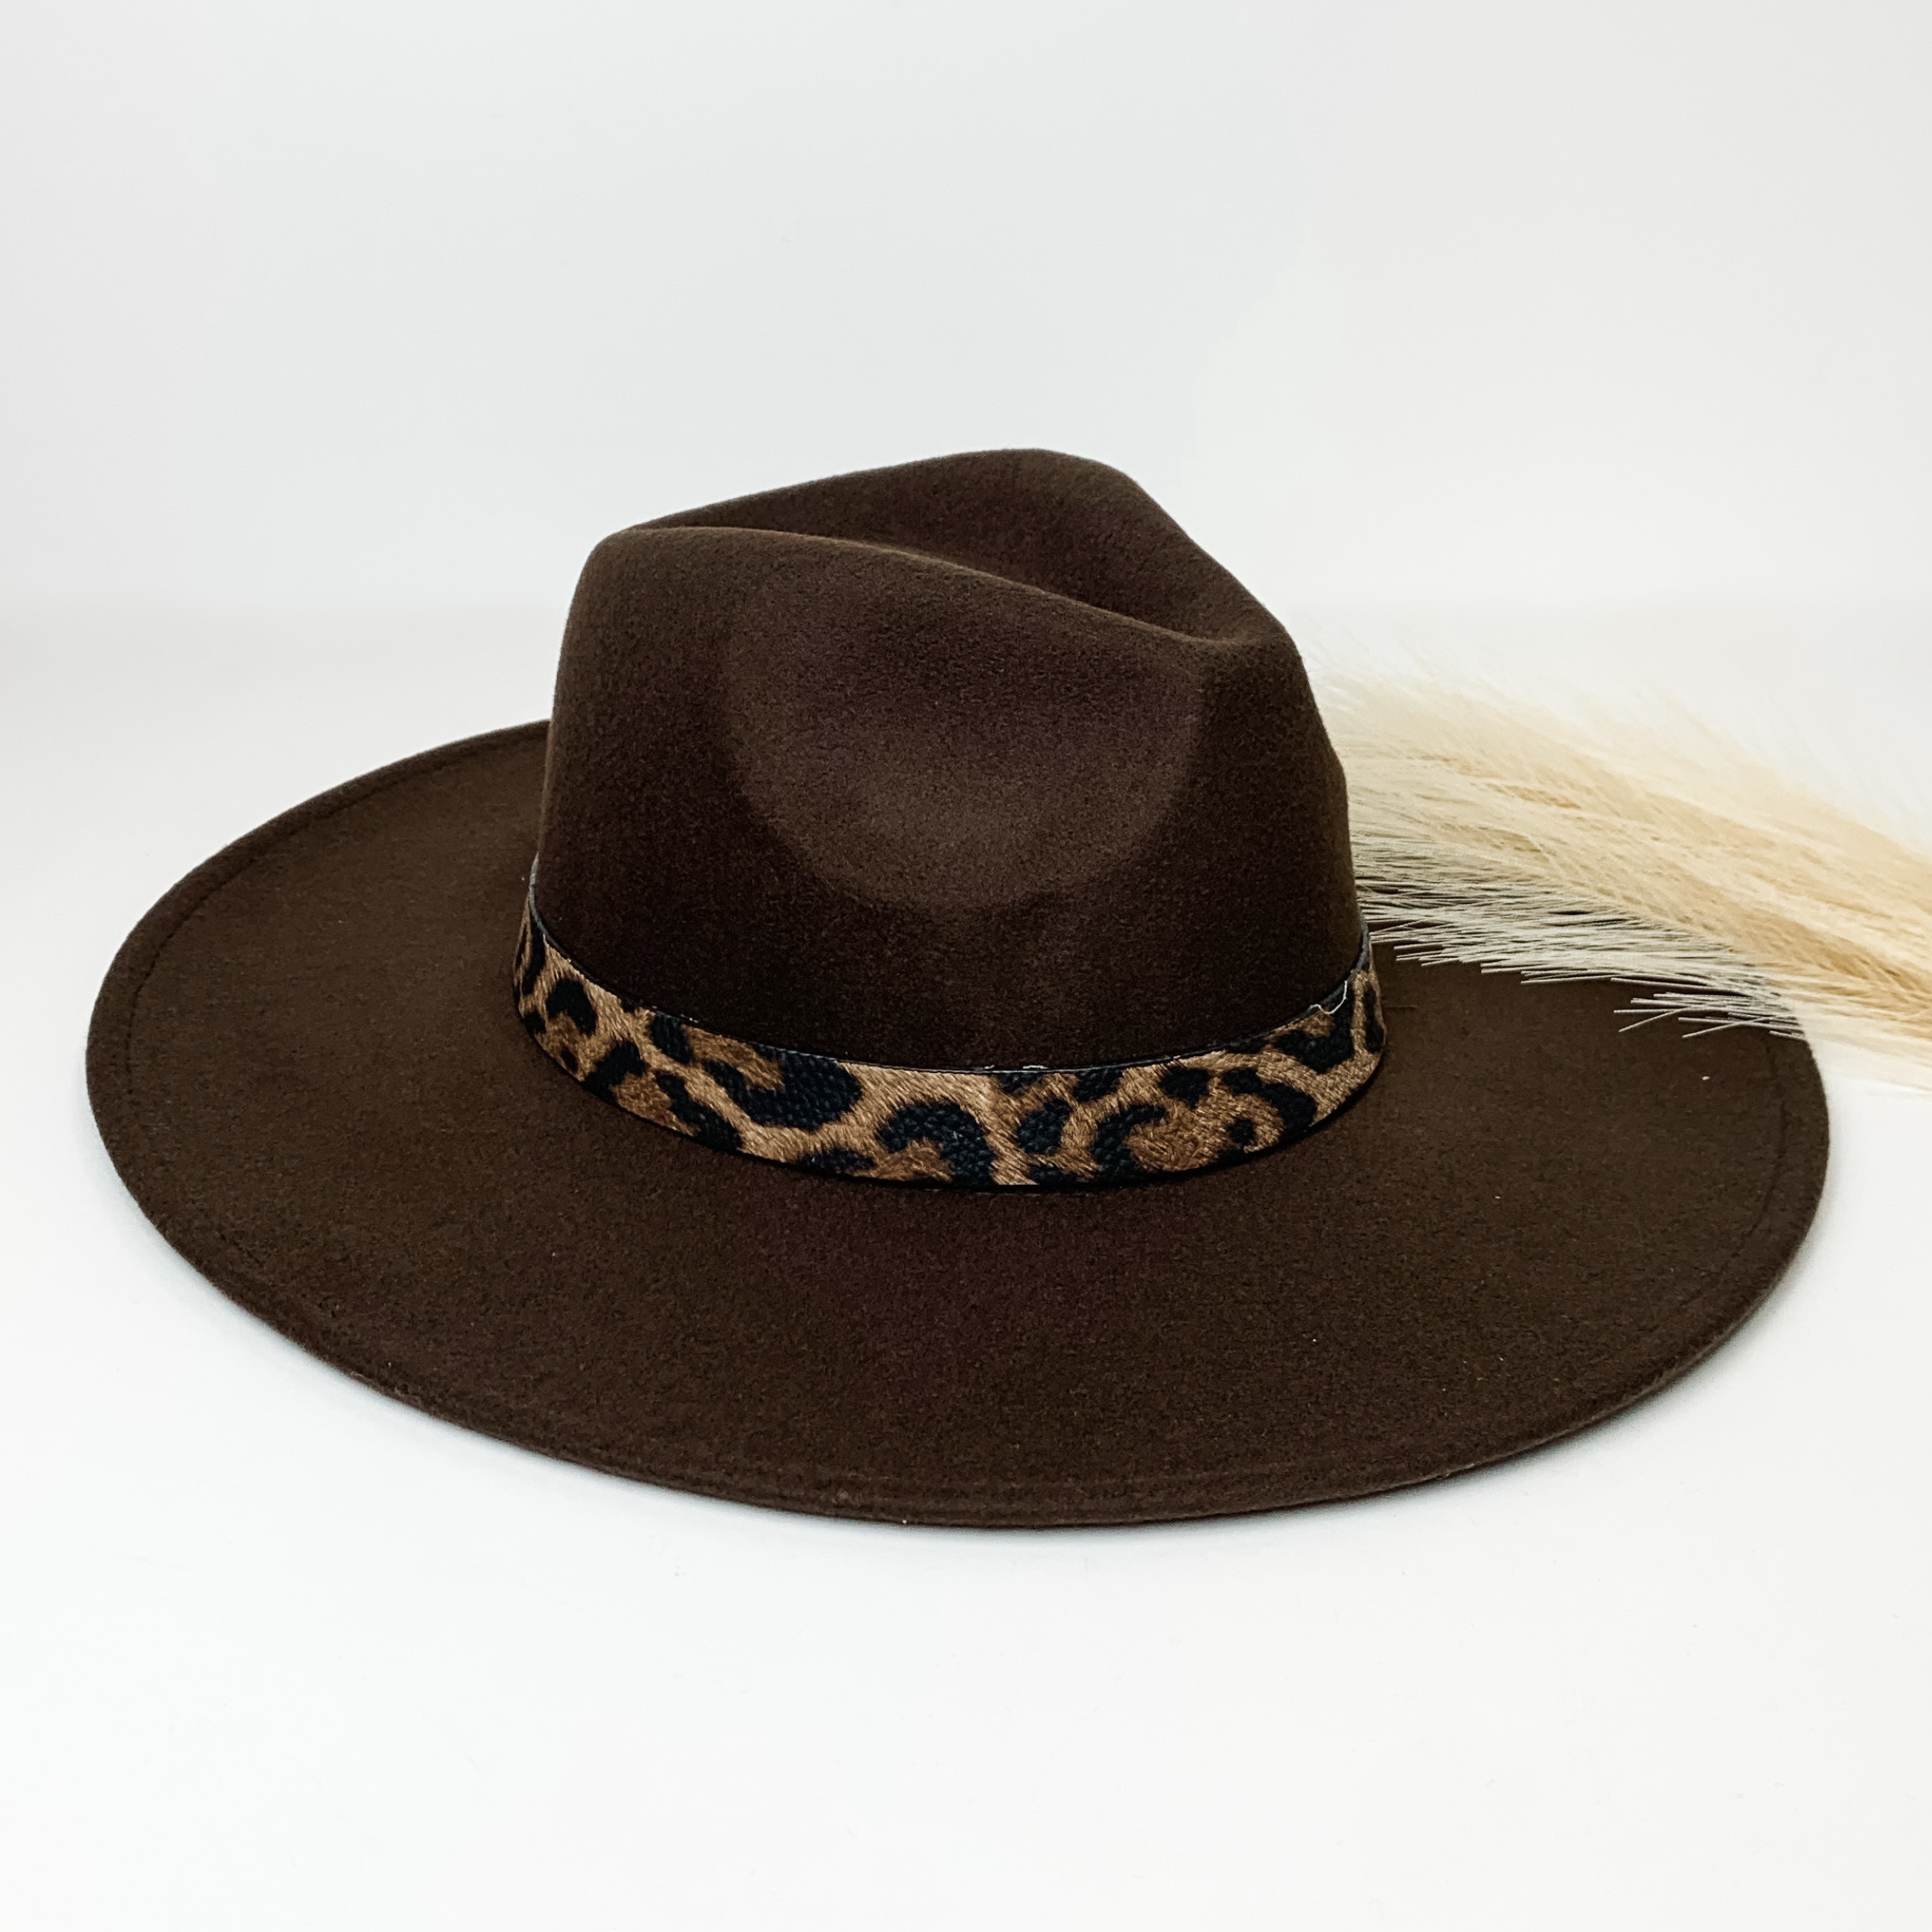 Dark brown flat brim hat with a leopard print hat bad around the crown. This hat is pictured on a white background with ivory pompous grass laying partially on the brim.